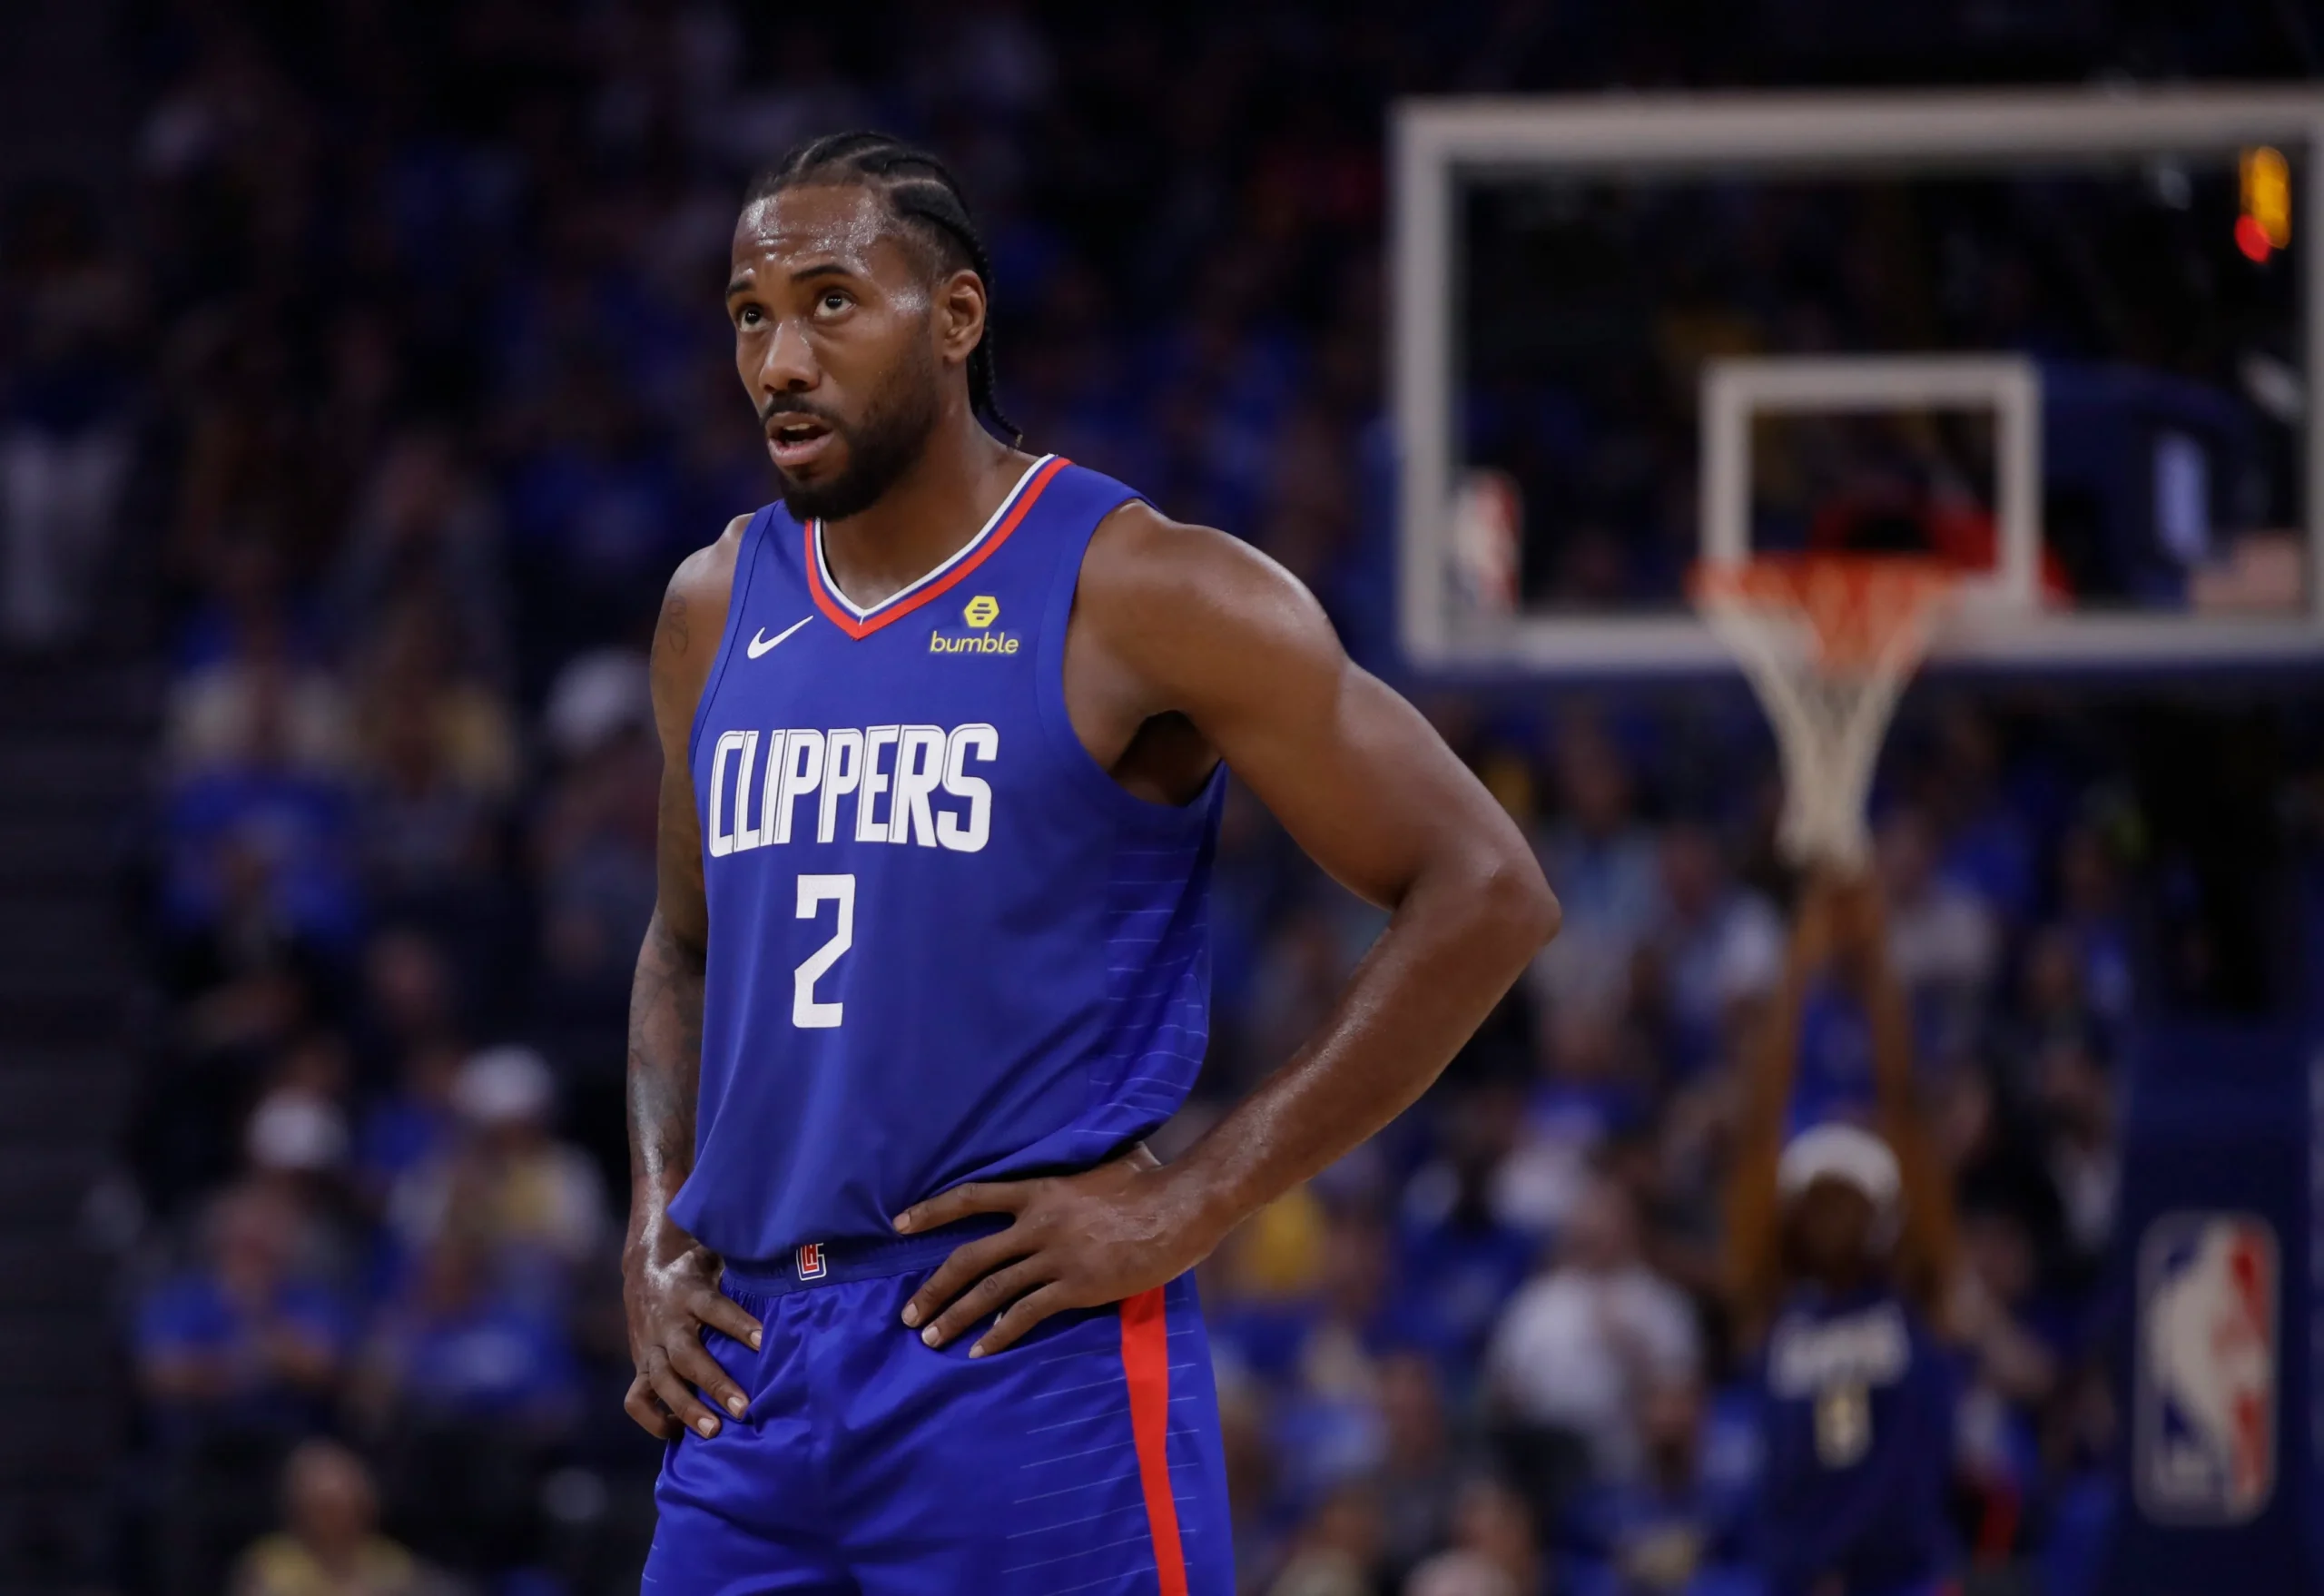 New York Knicks to Acquire Los Angeles Clippers' Kawhi Leonard in a Blockbuster Trade Proposal